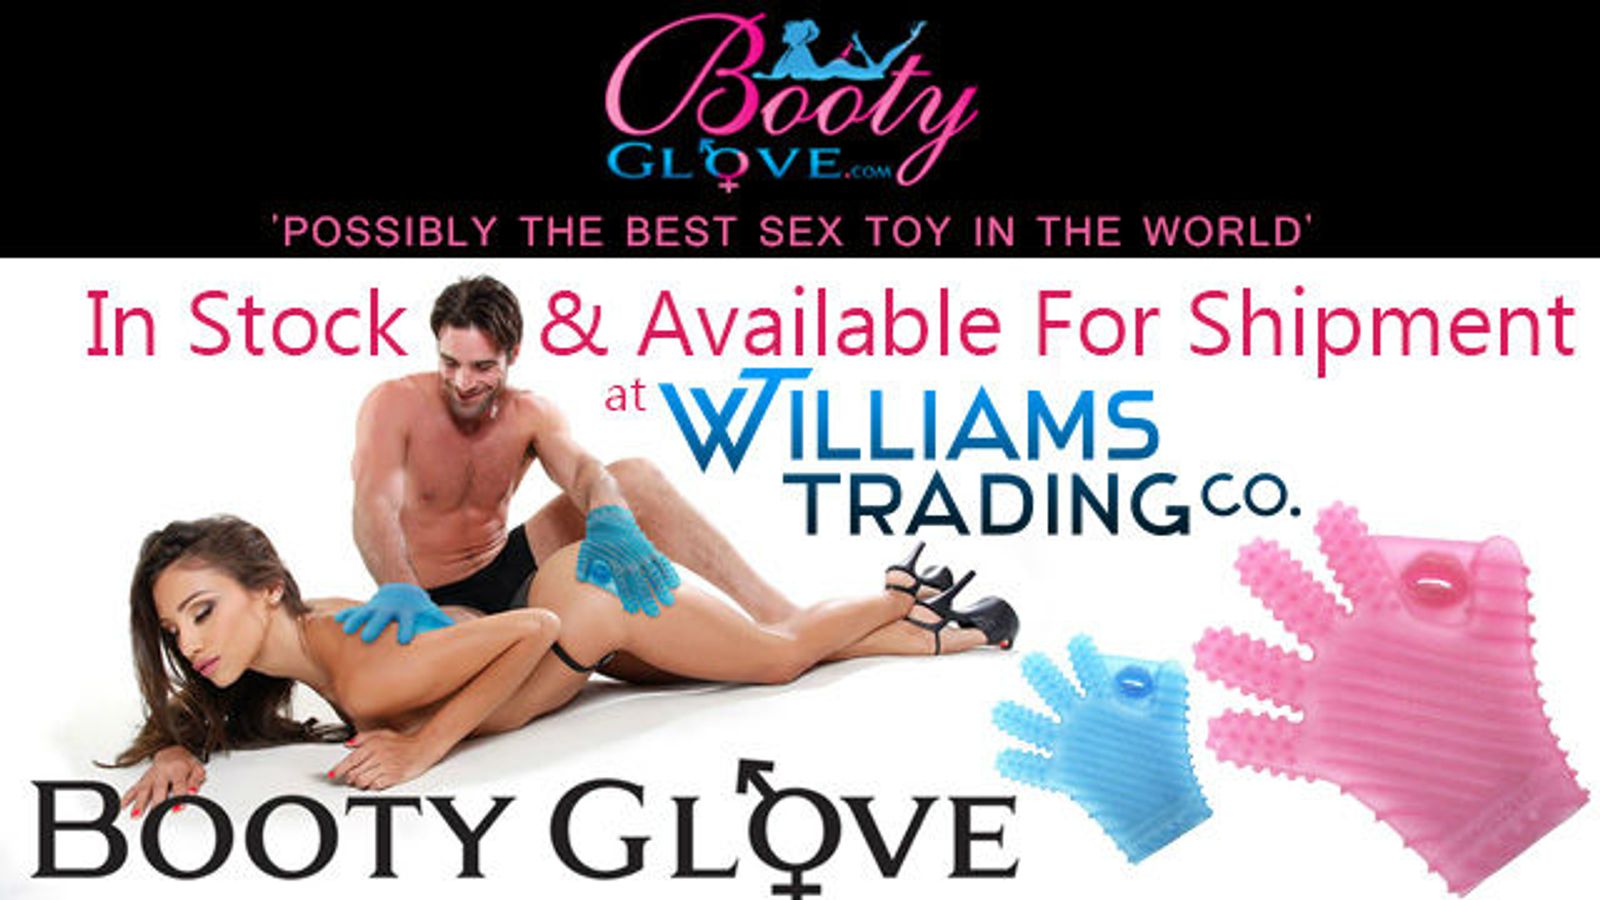 Booty Glove Available for Shipment at Williams Trading Company